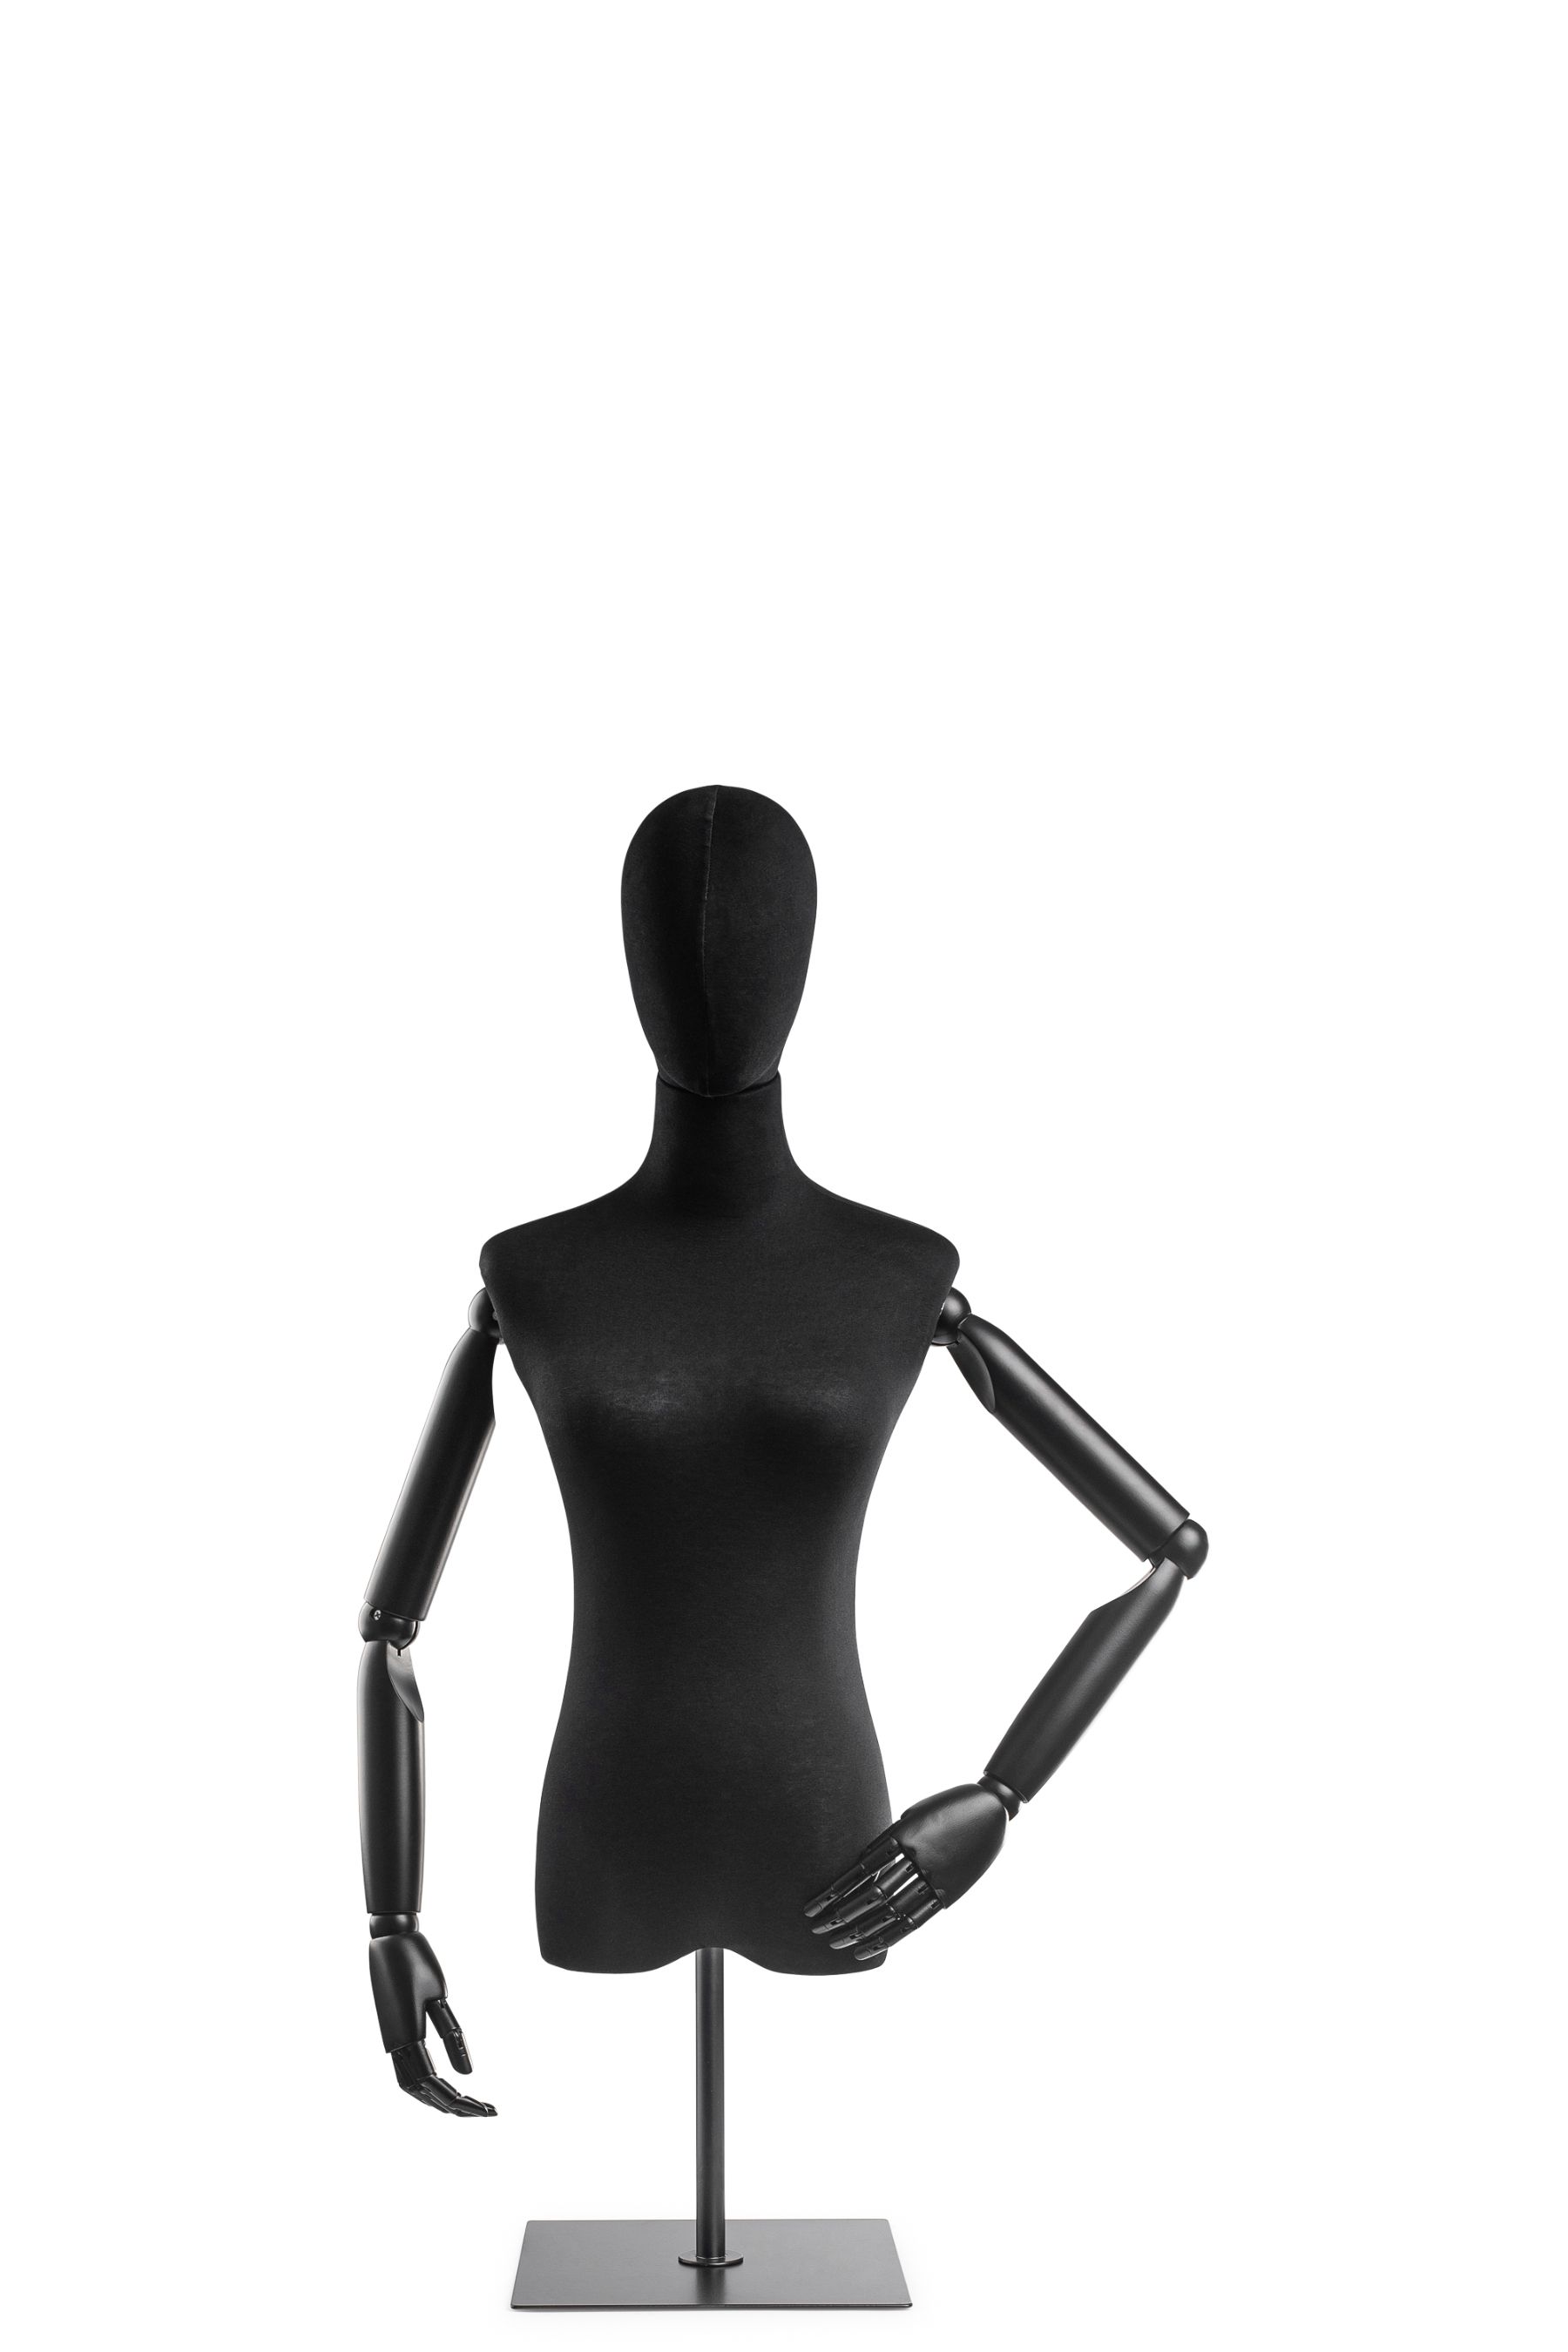 A mannequin sitting on top of a metal stand. Clothing mannequin